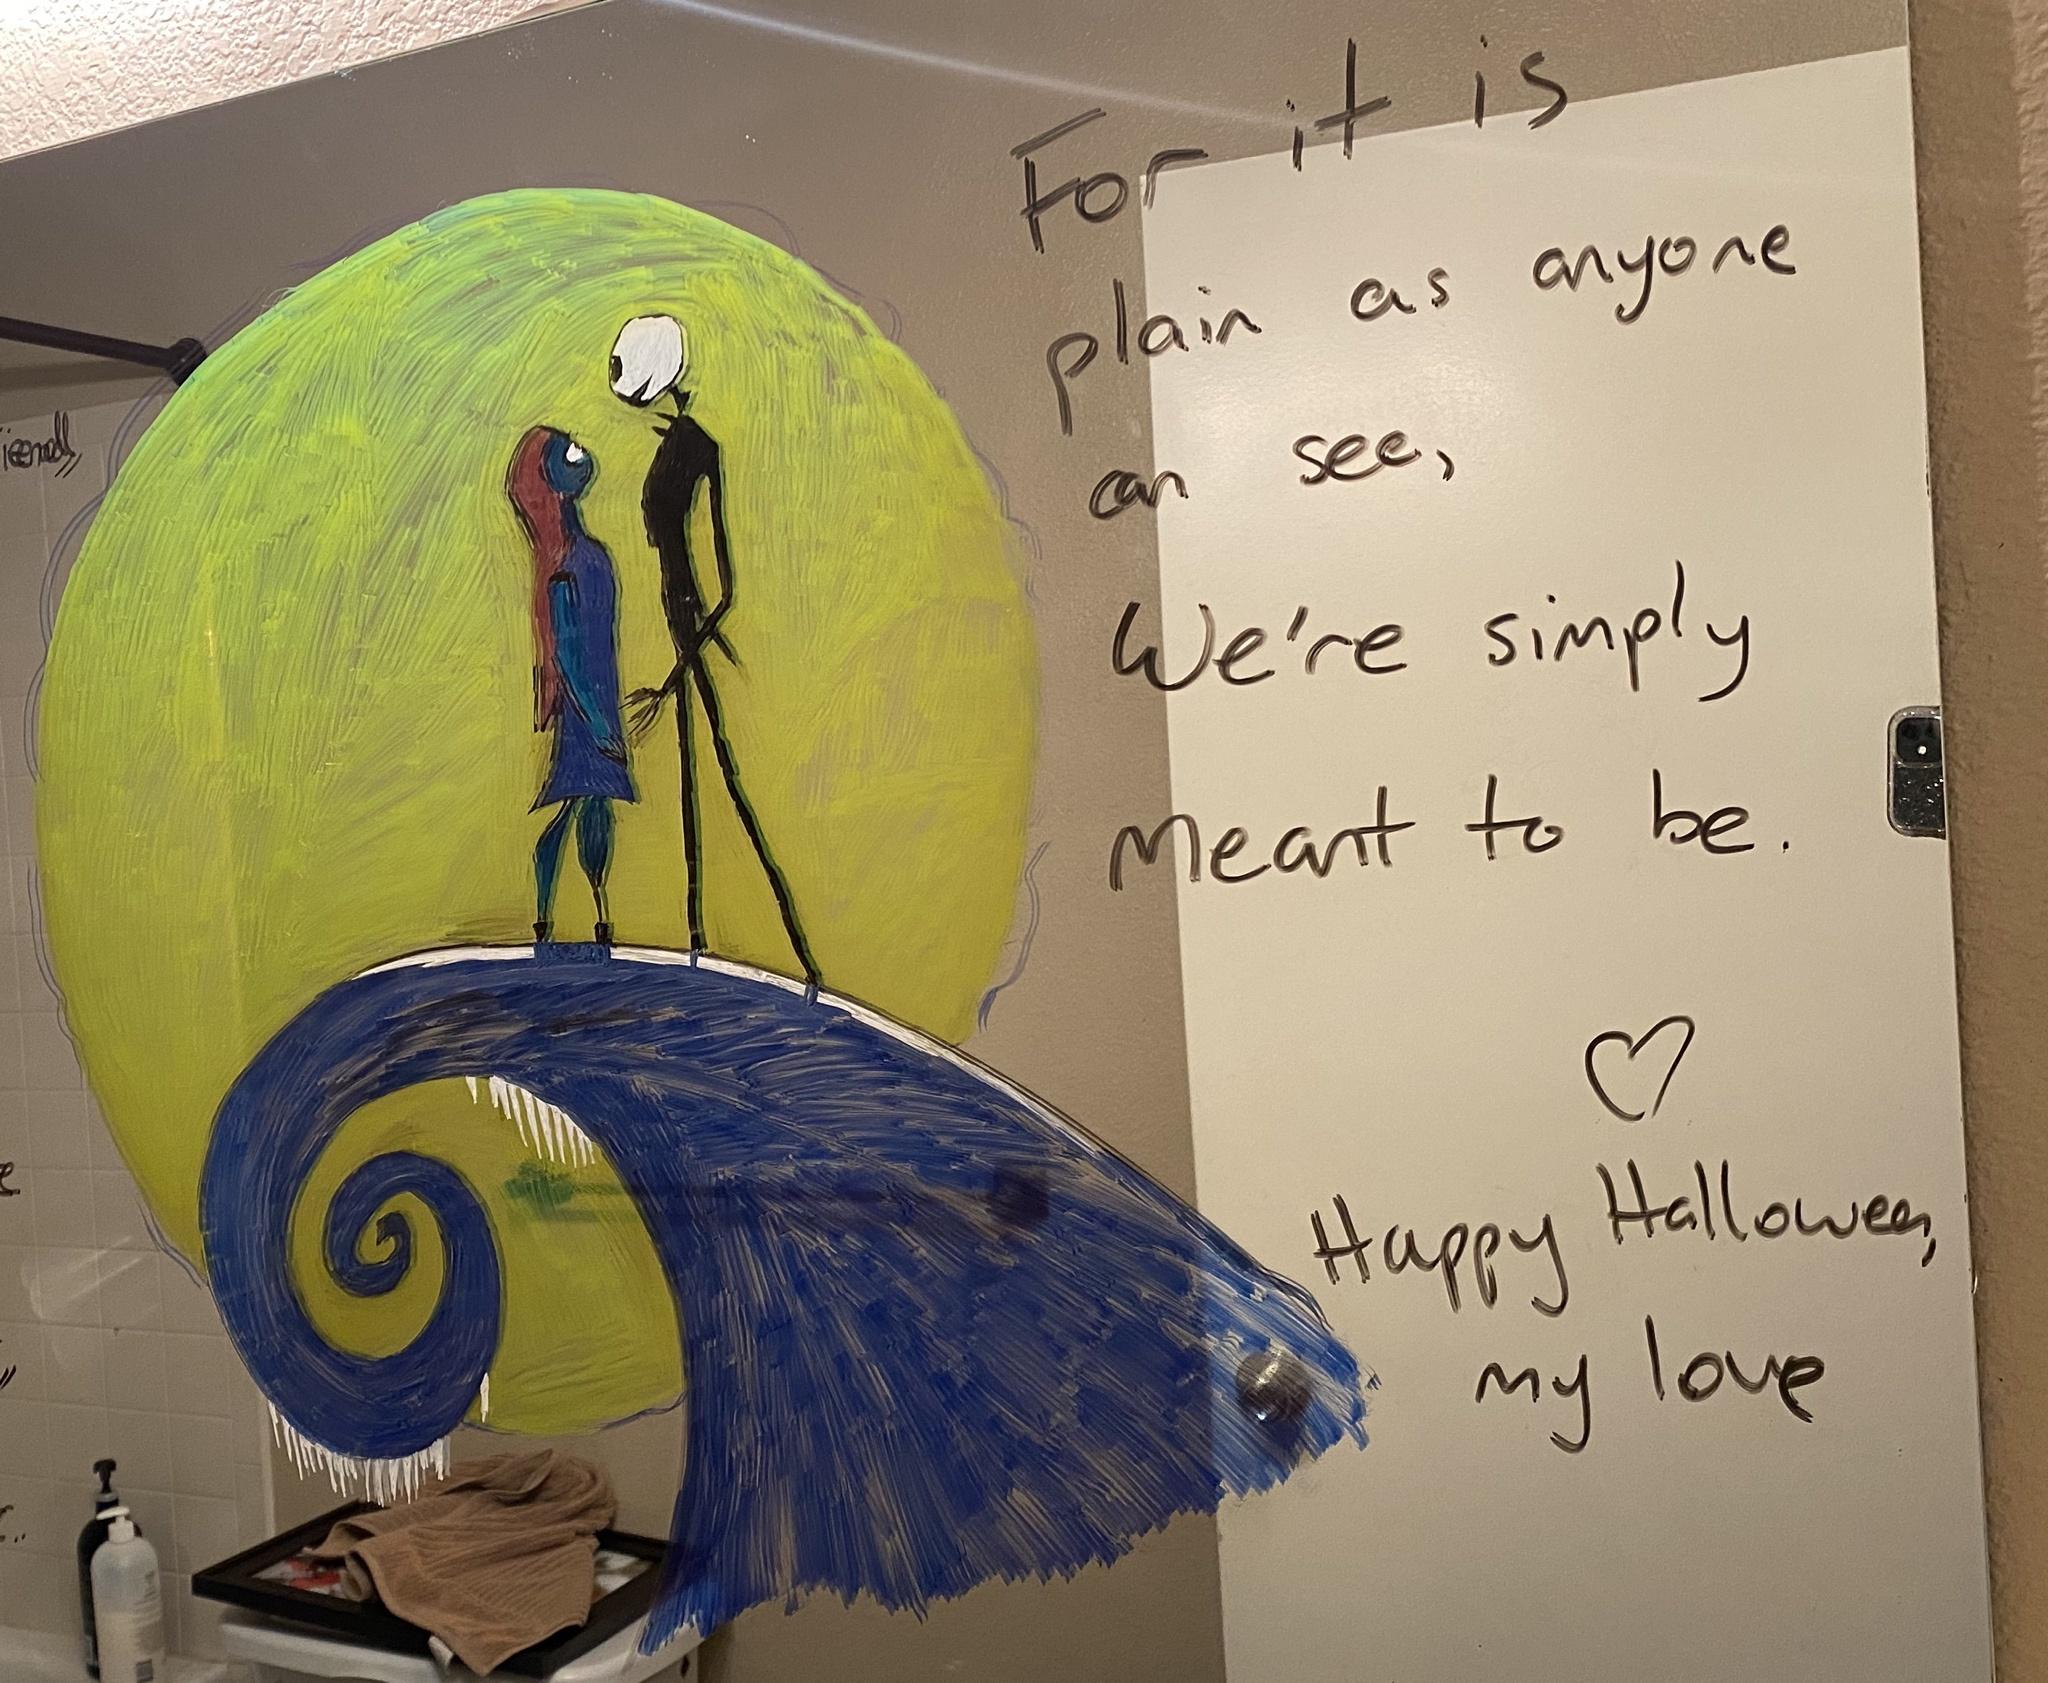 mural - For it is plain as anyone iemel see, We're simply Meant to be. 3 Happy Halloween my love